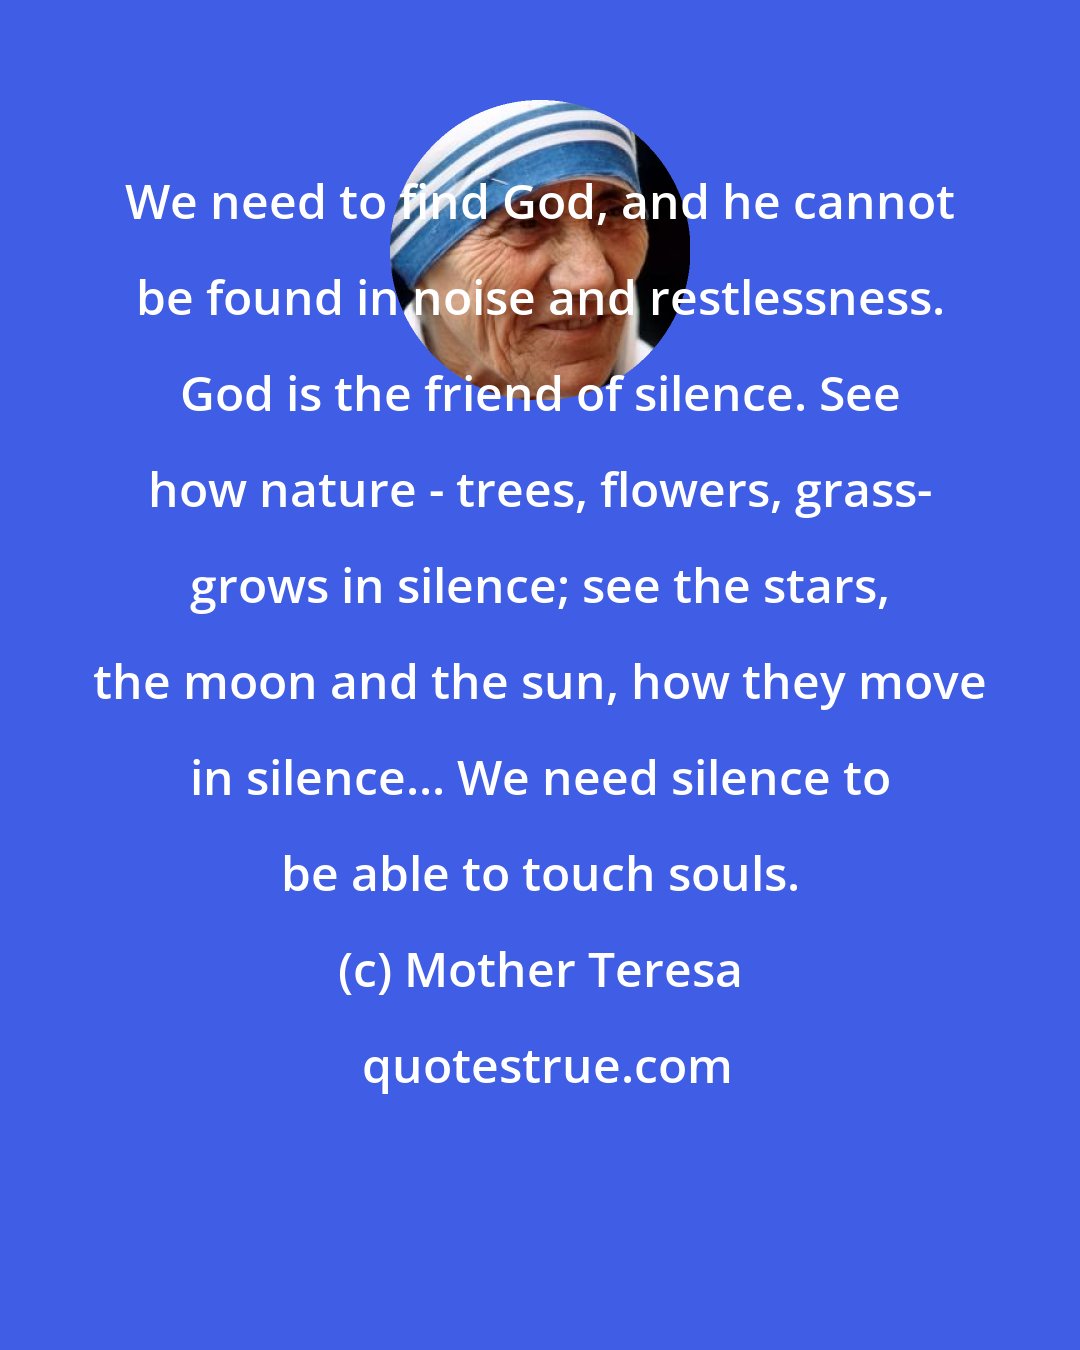 Mother Teresa: We need to find God, and he cannot be found in noise and restlessness. God is the friend of silence. See how nature - trees, flowers, grass- grows in silence; see the stars, the moon and the sun, how they move in silence... We need silence to be able to touch souls.